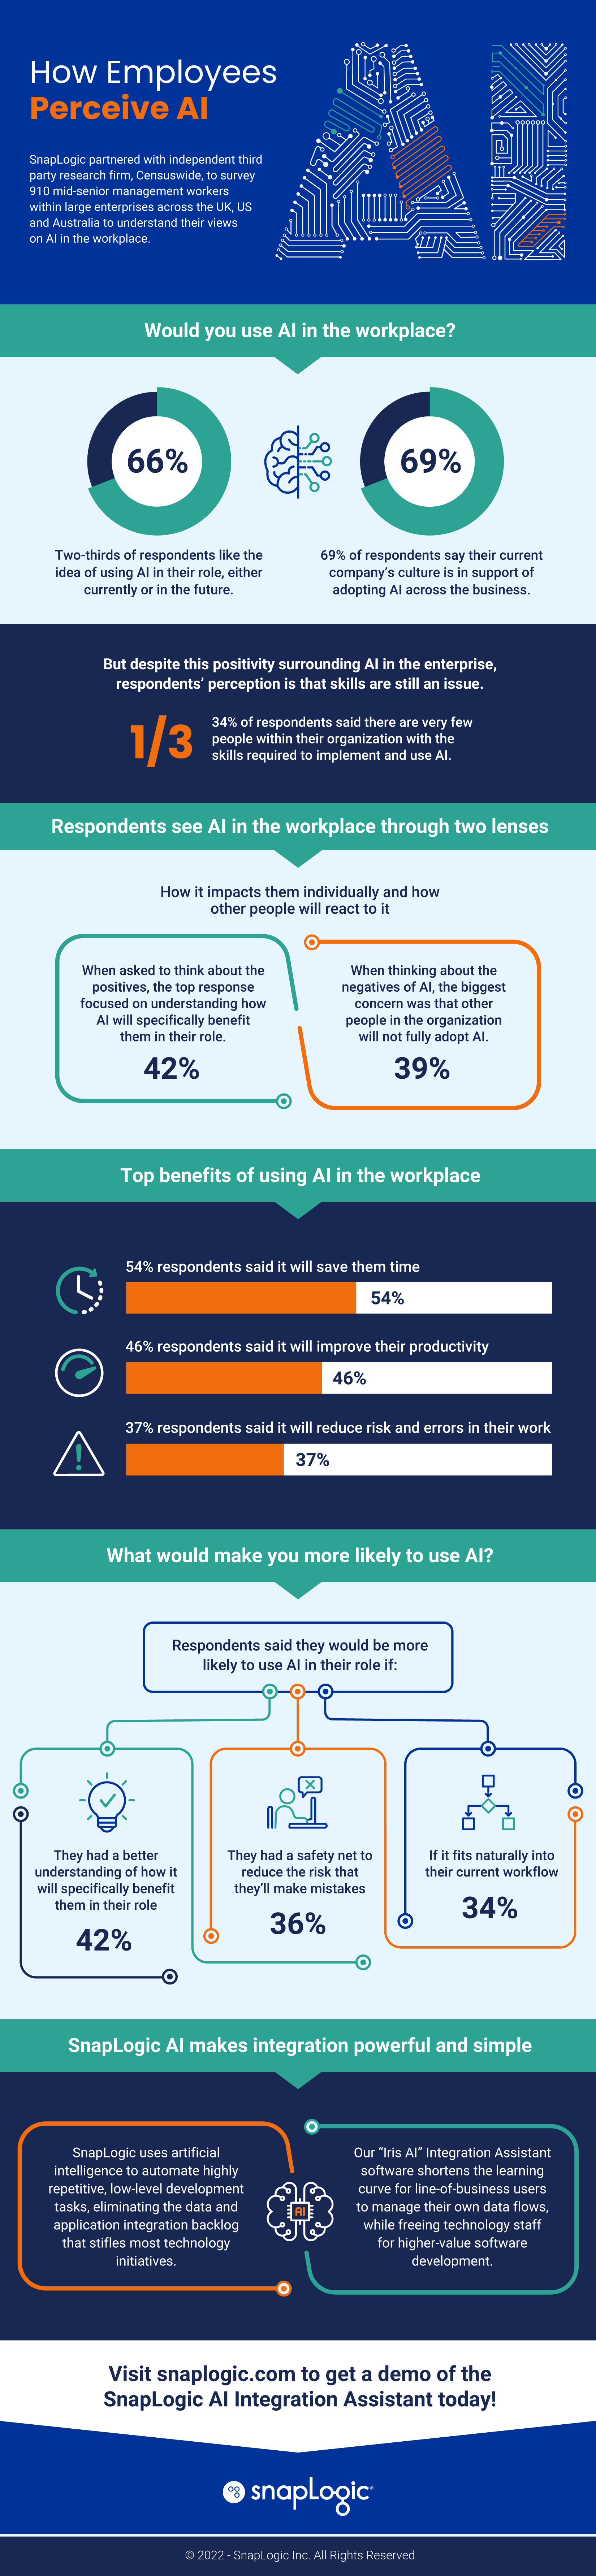 How Employees Perceive AI infographic